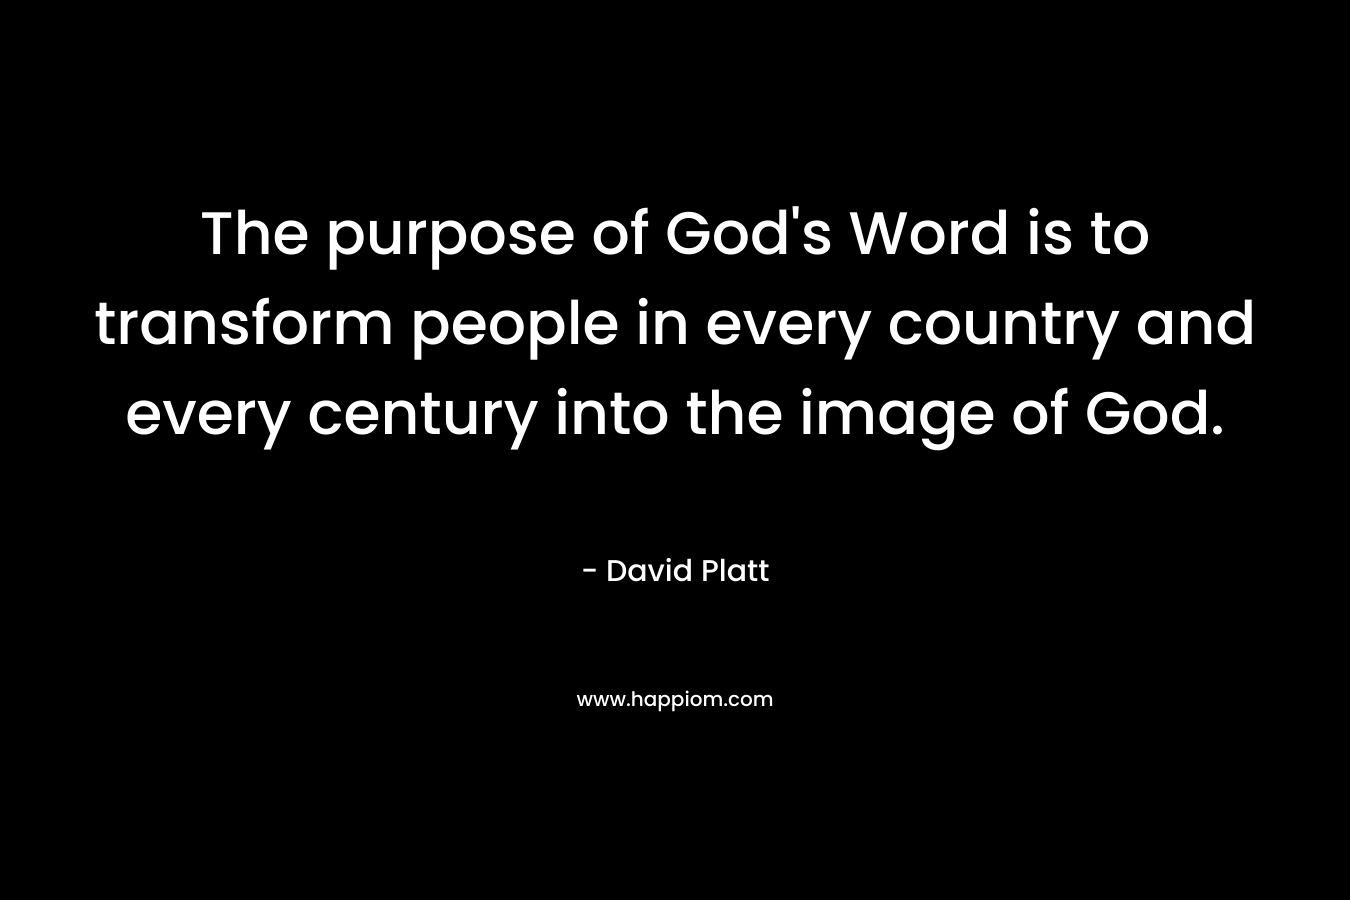 The purpose of God's Word is to transform people in every country and every century into the image of God.